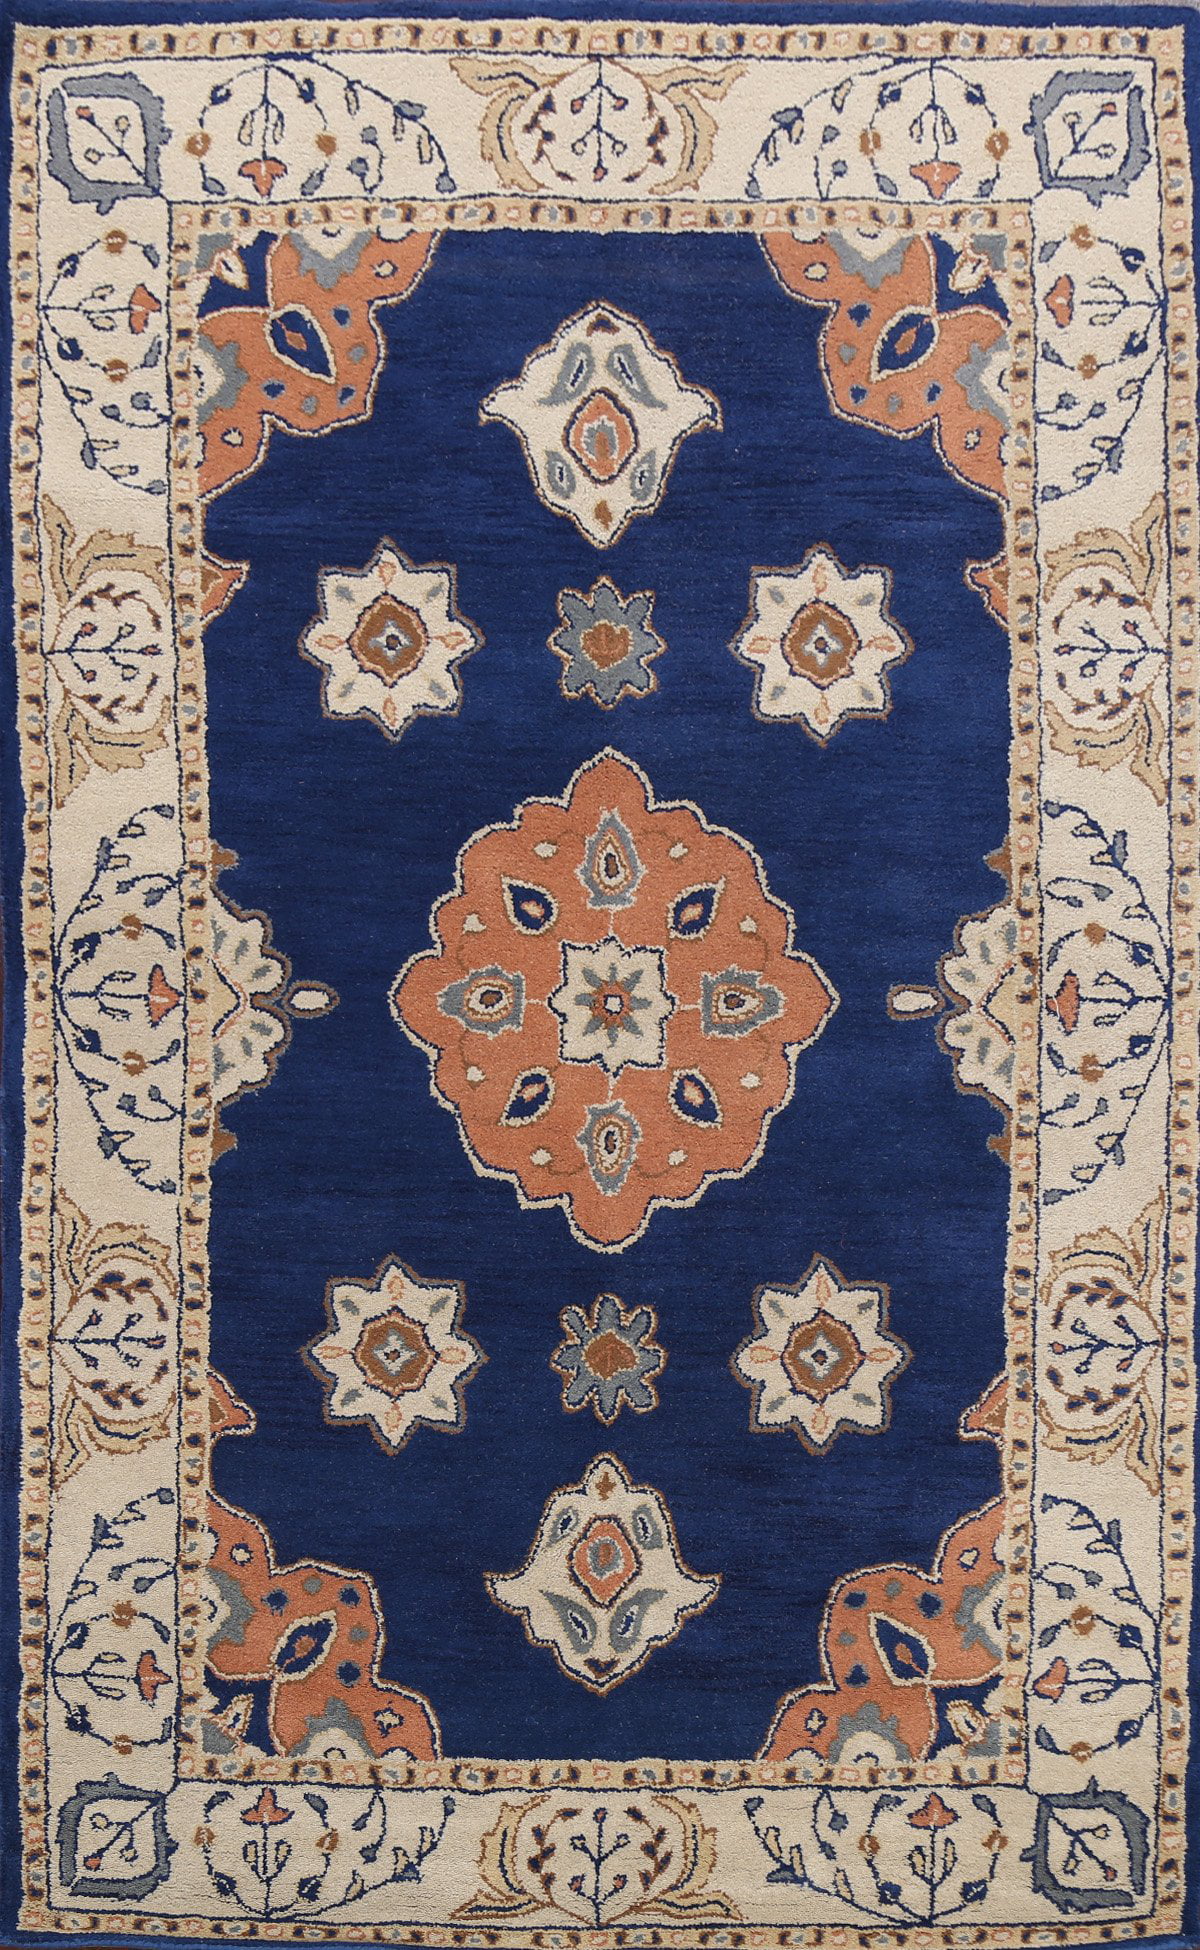 NAVY BLUE Floral Traditional Oriental Area Rug Hand-tufted Home Decor Carpet 6x9